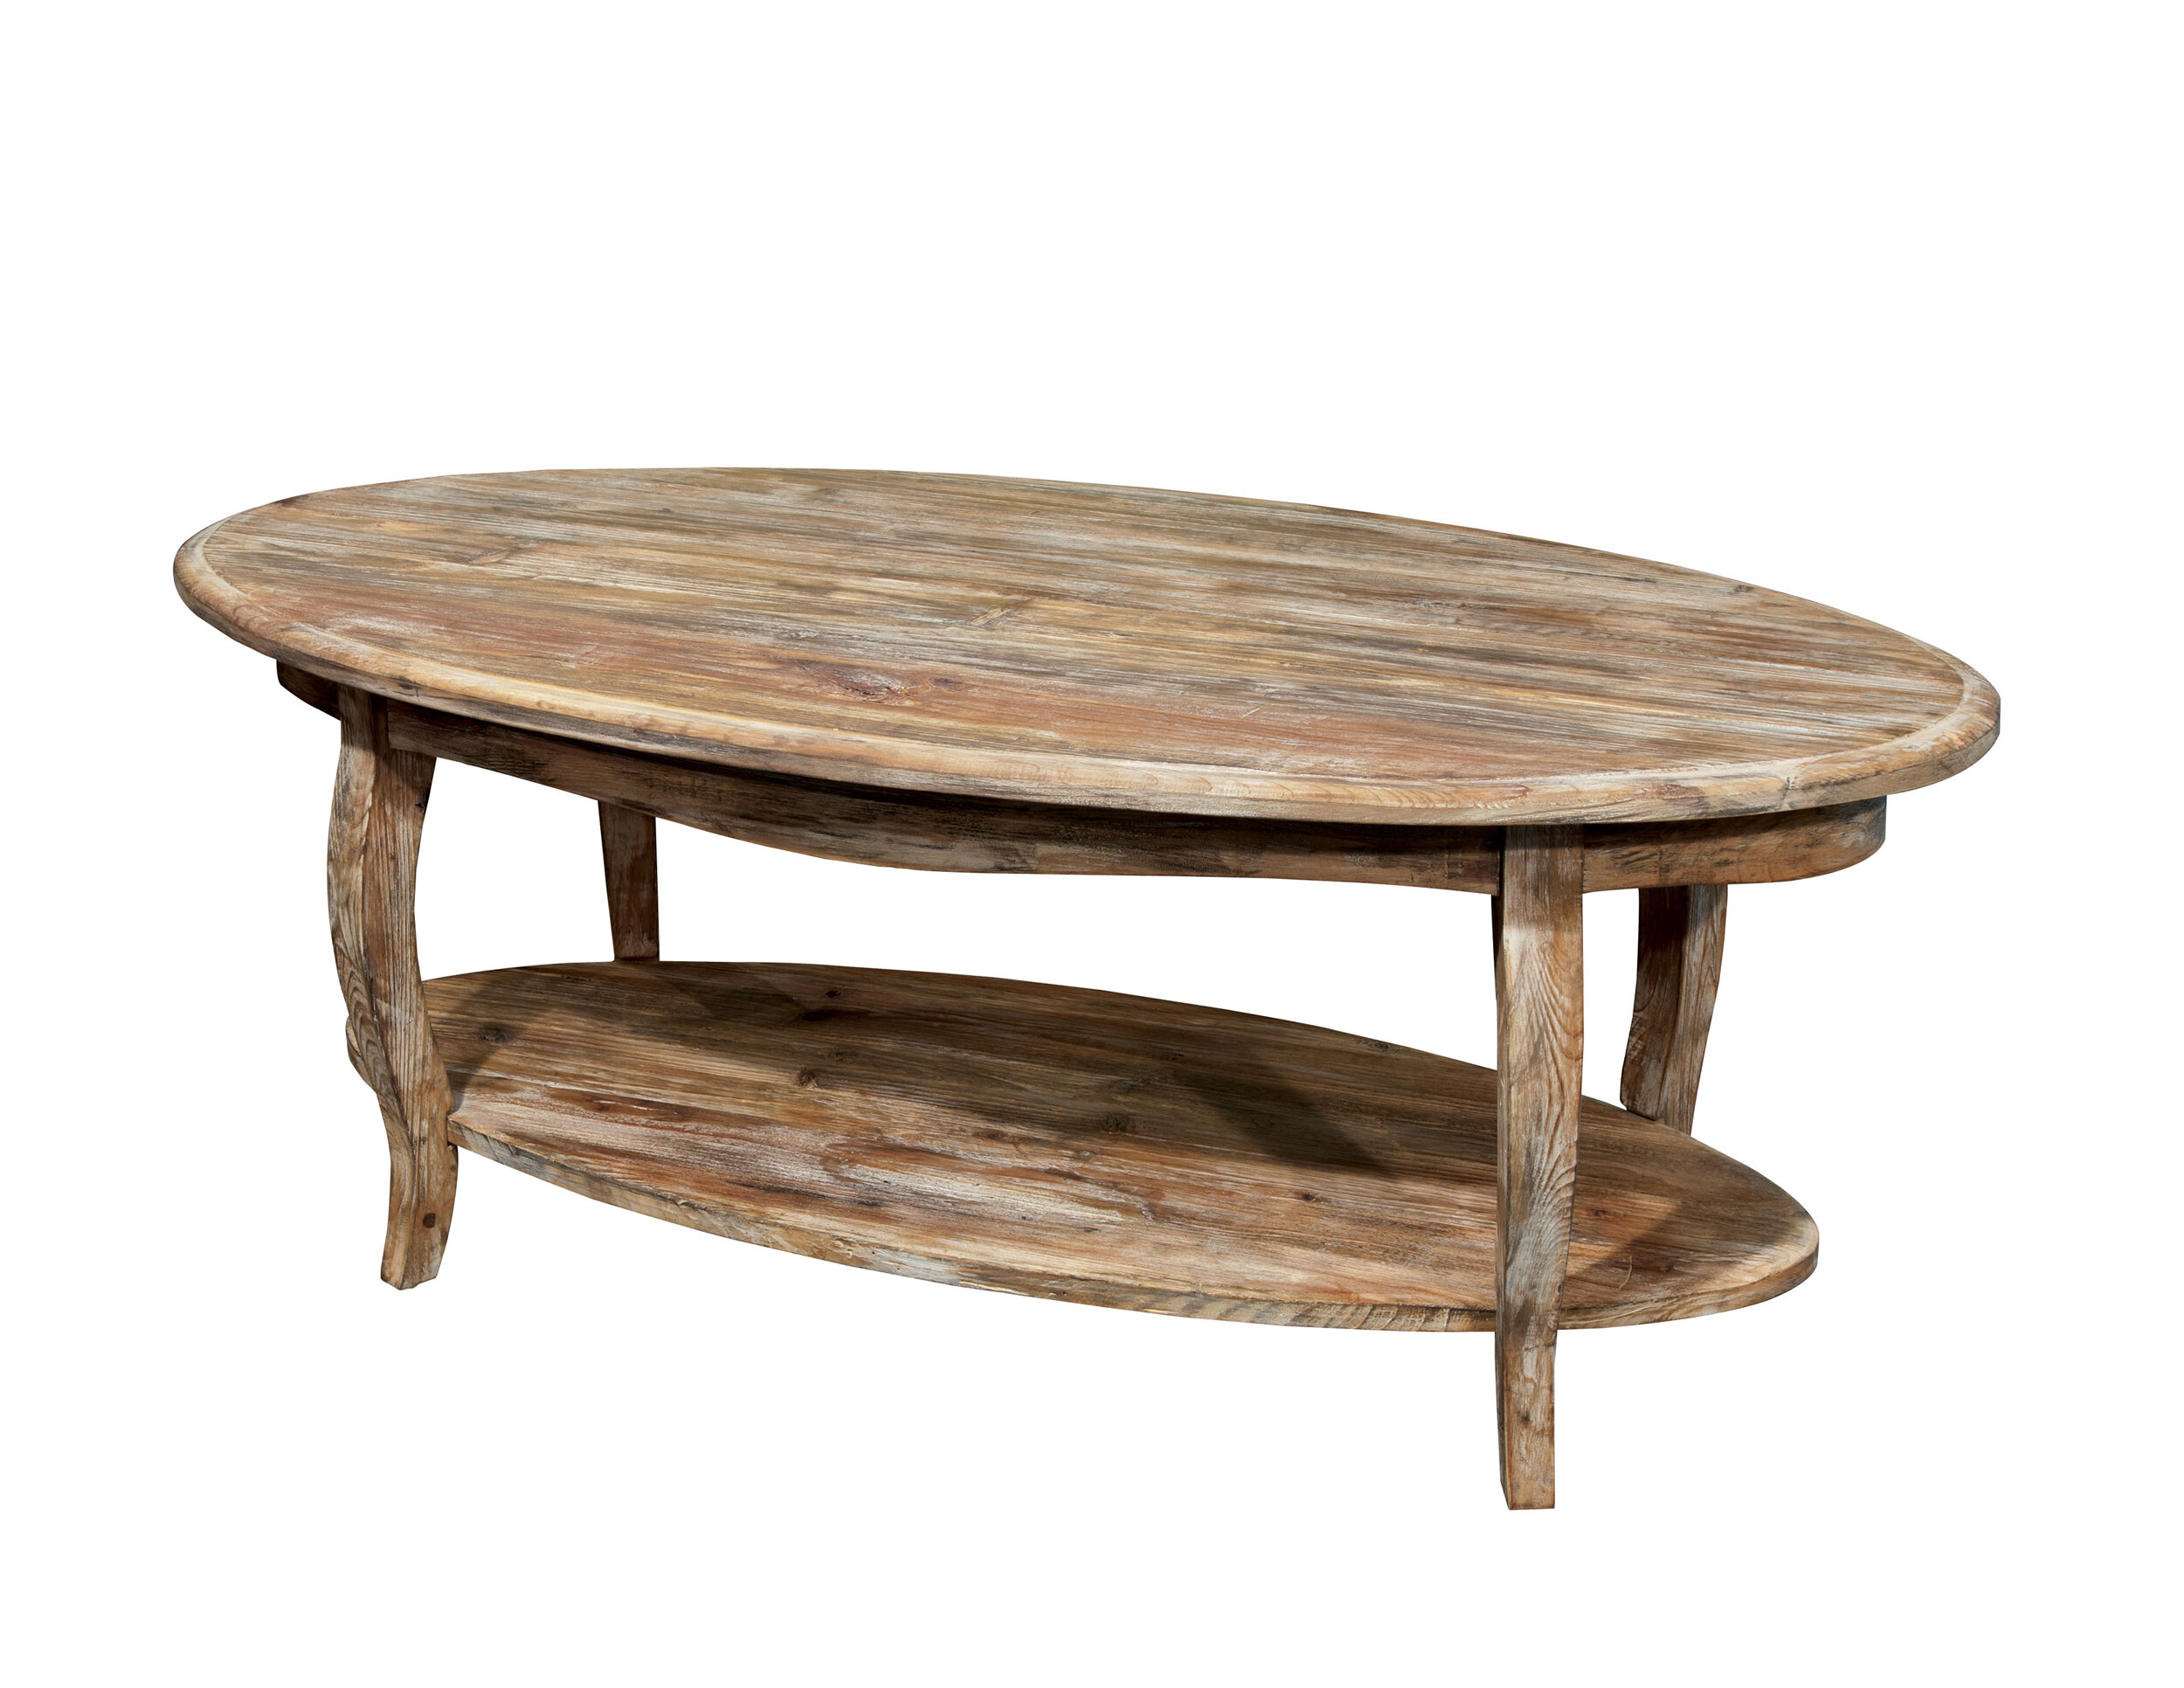 Sh-Giovannini Oval Coffee Table with Oak leaves арт. 1019